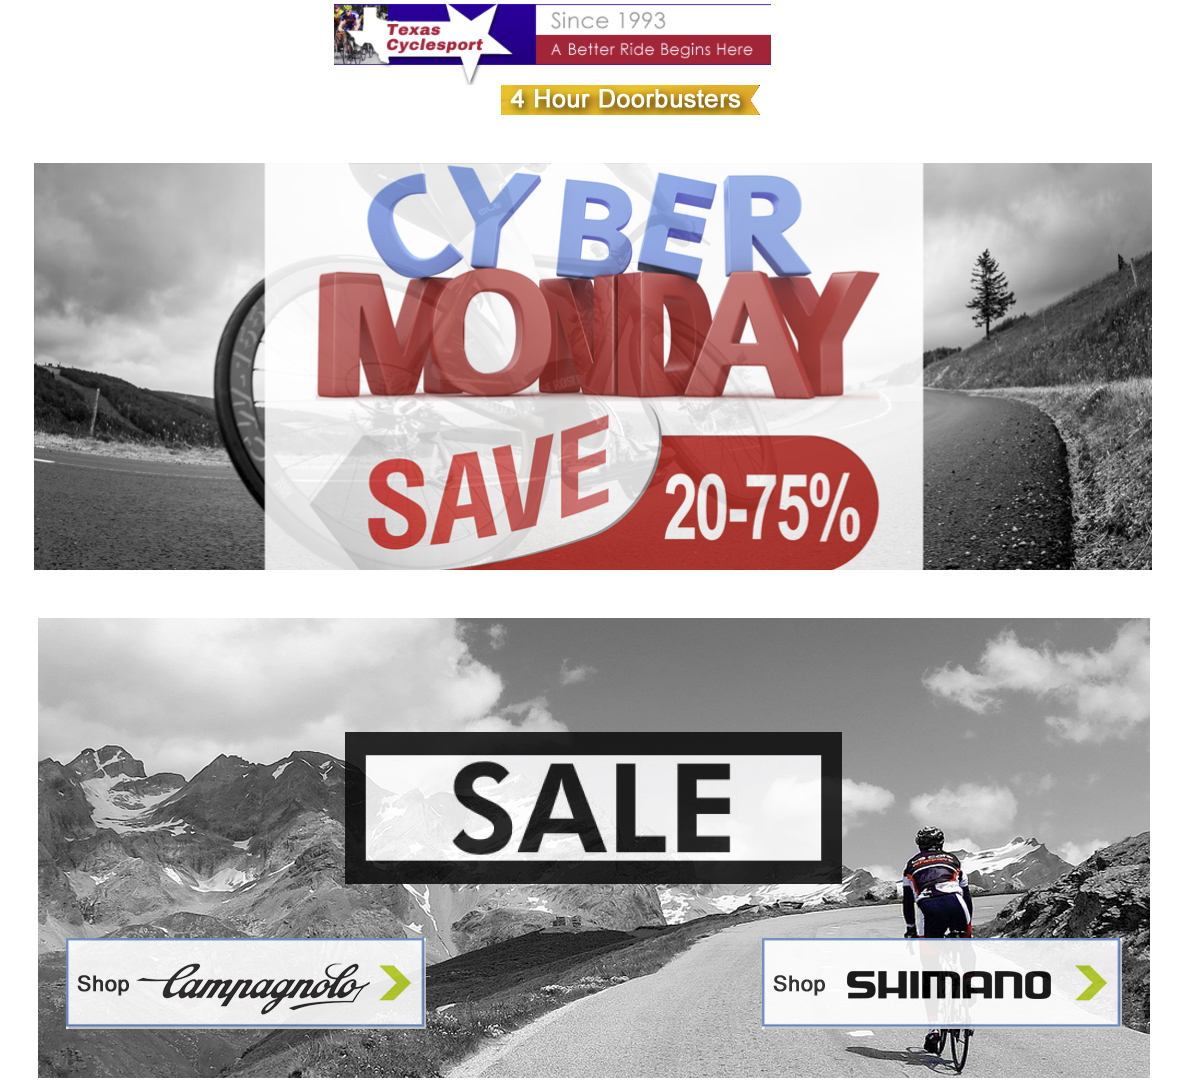 Score Cyber Monday Cycling Deals | Texas Cyclesport